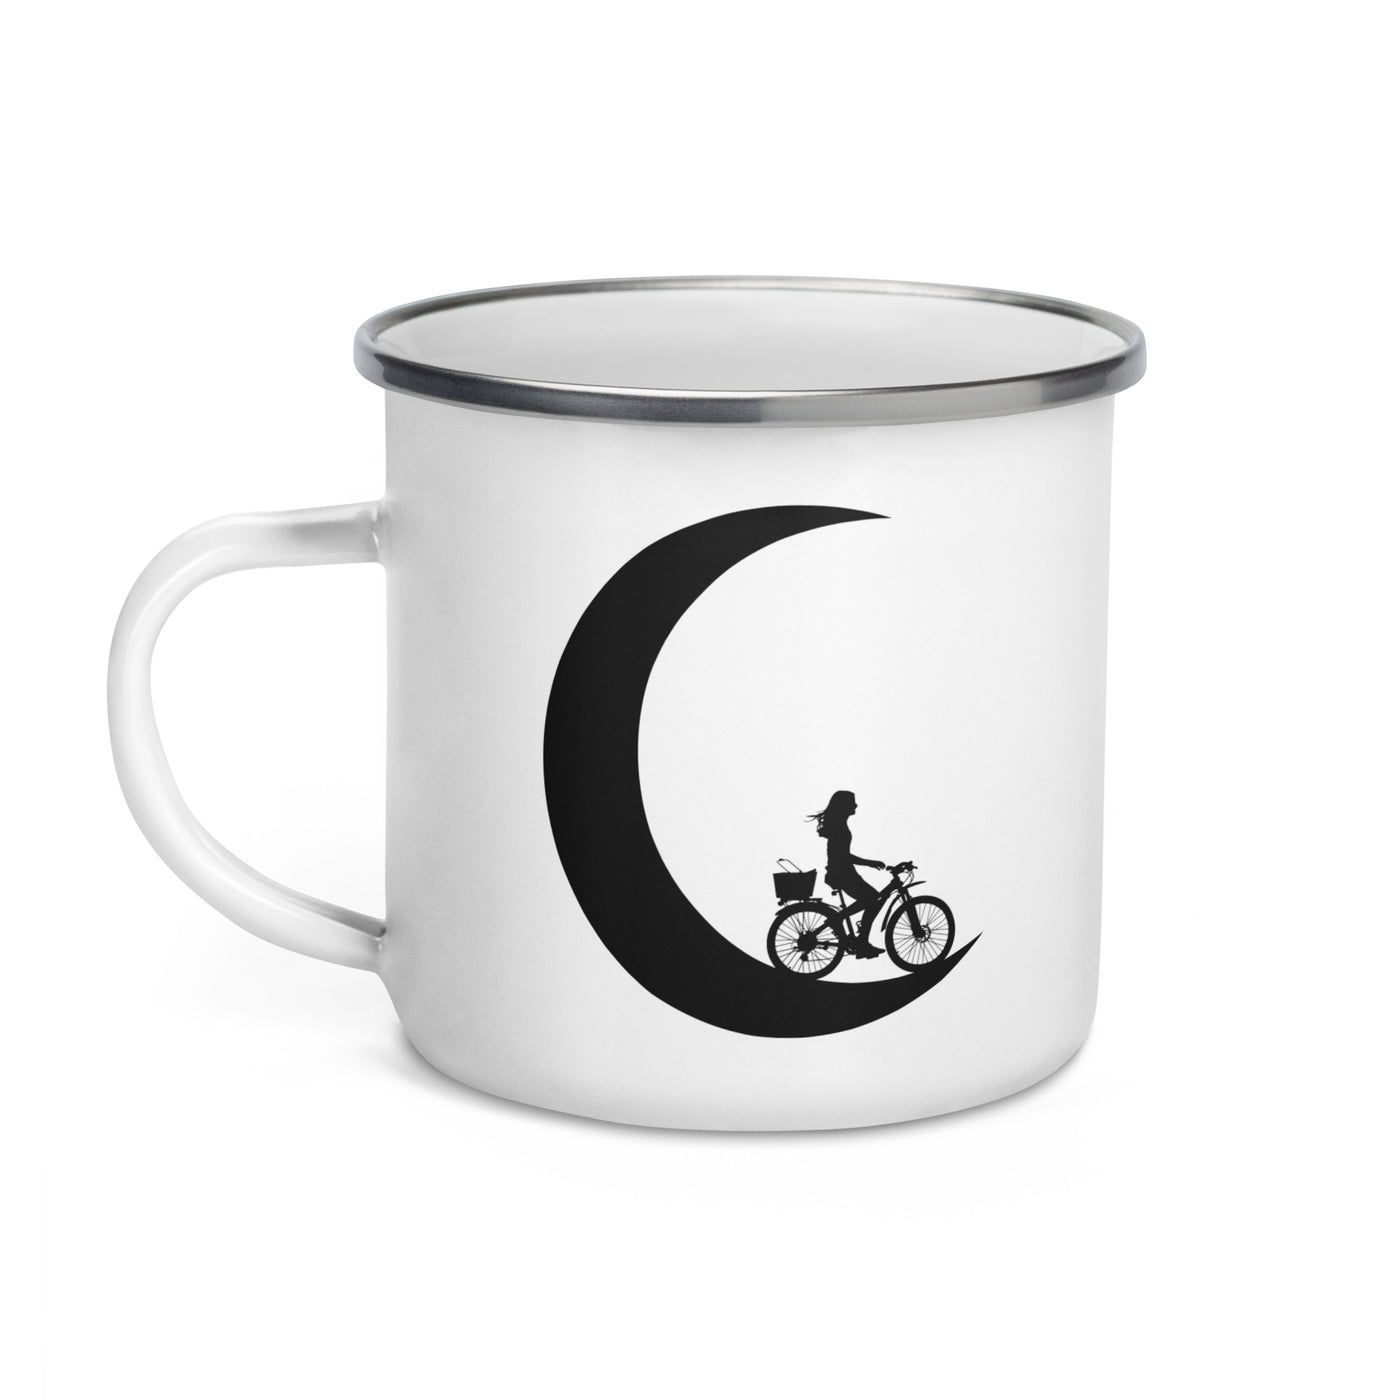 Crescent Moon - Female Cycling - Emaille Tasse fahrrad